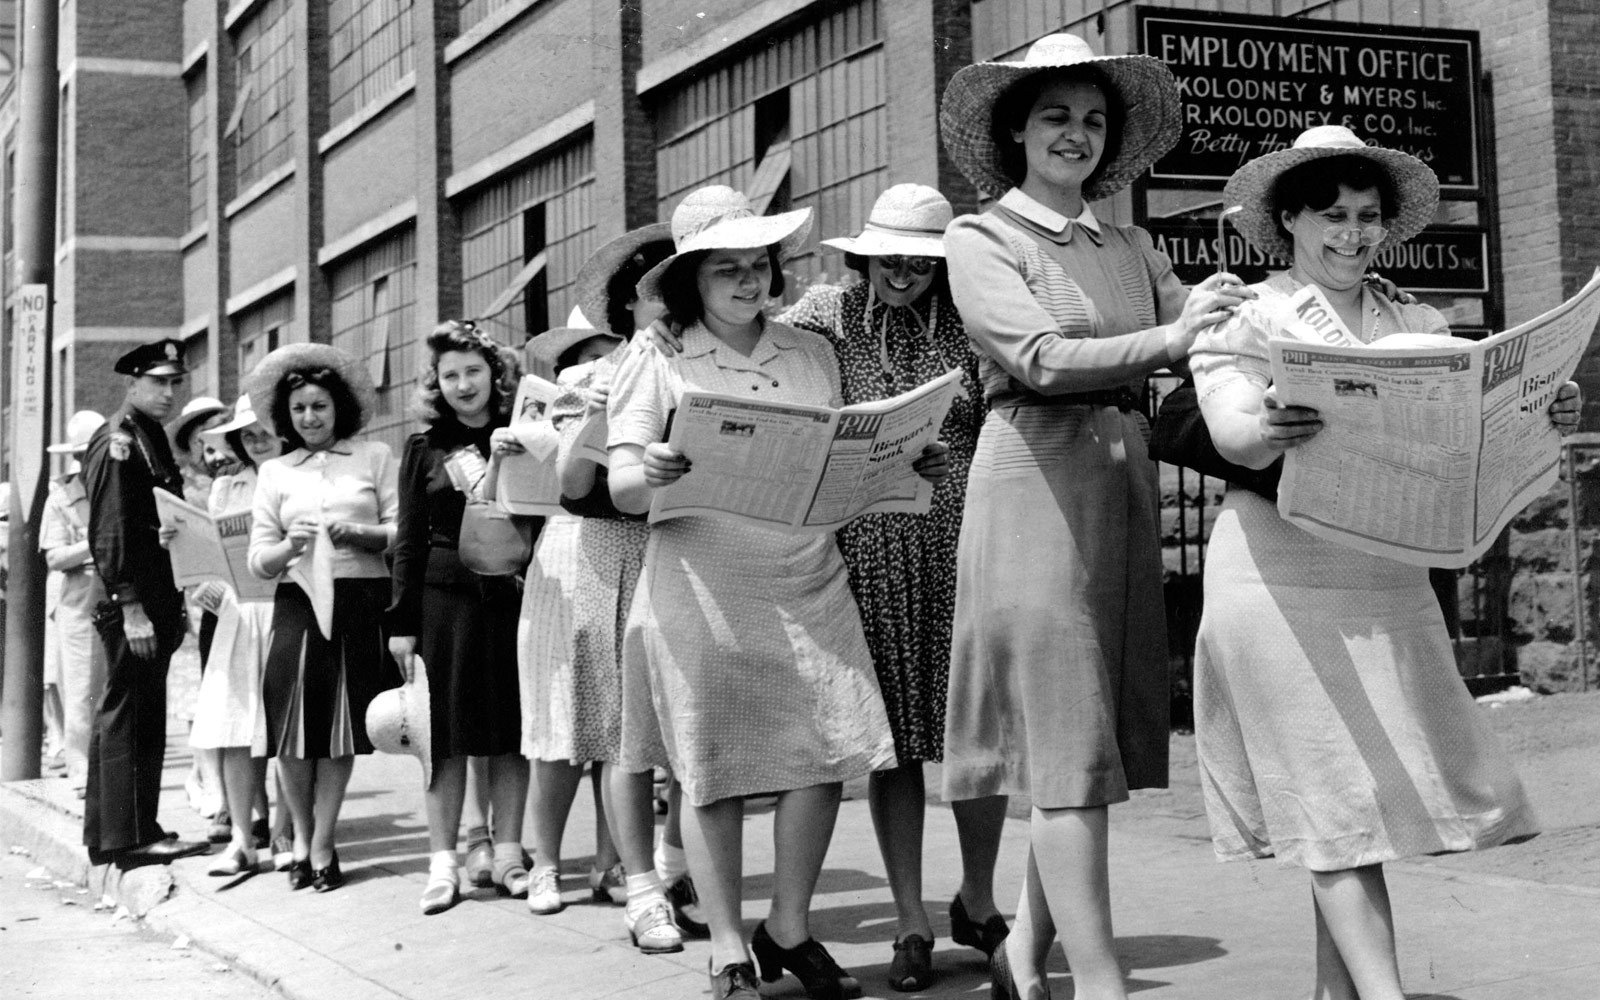 Women standing in a picket line reading the newspaper PM.